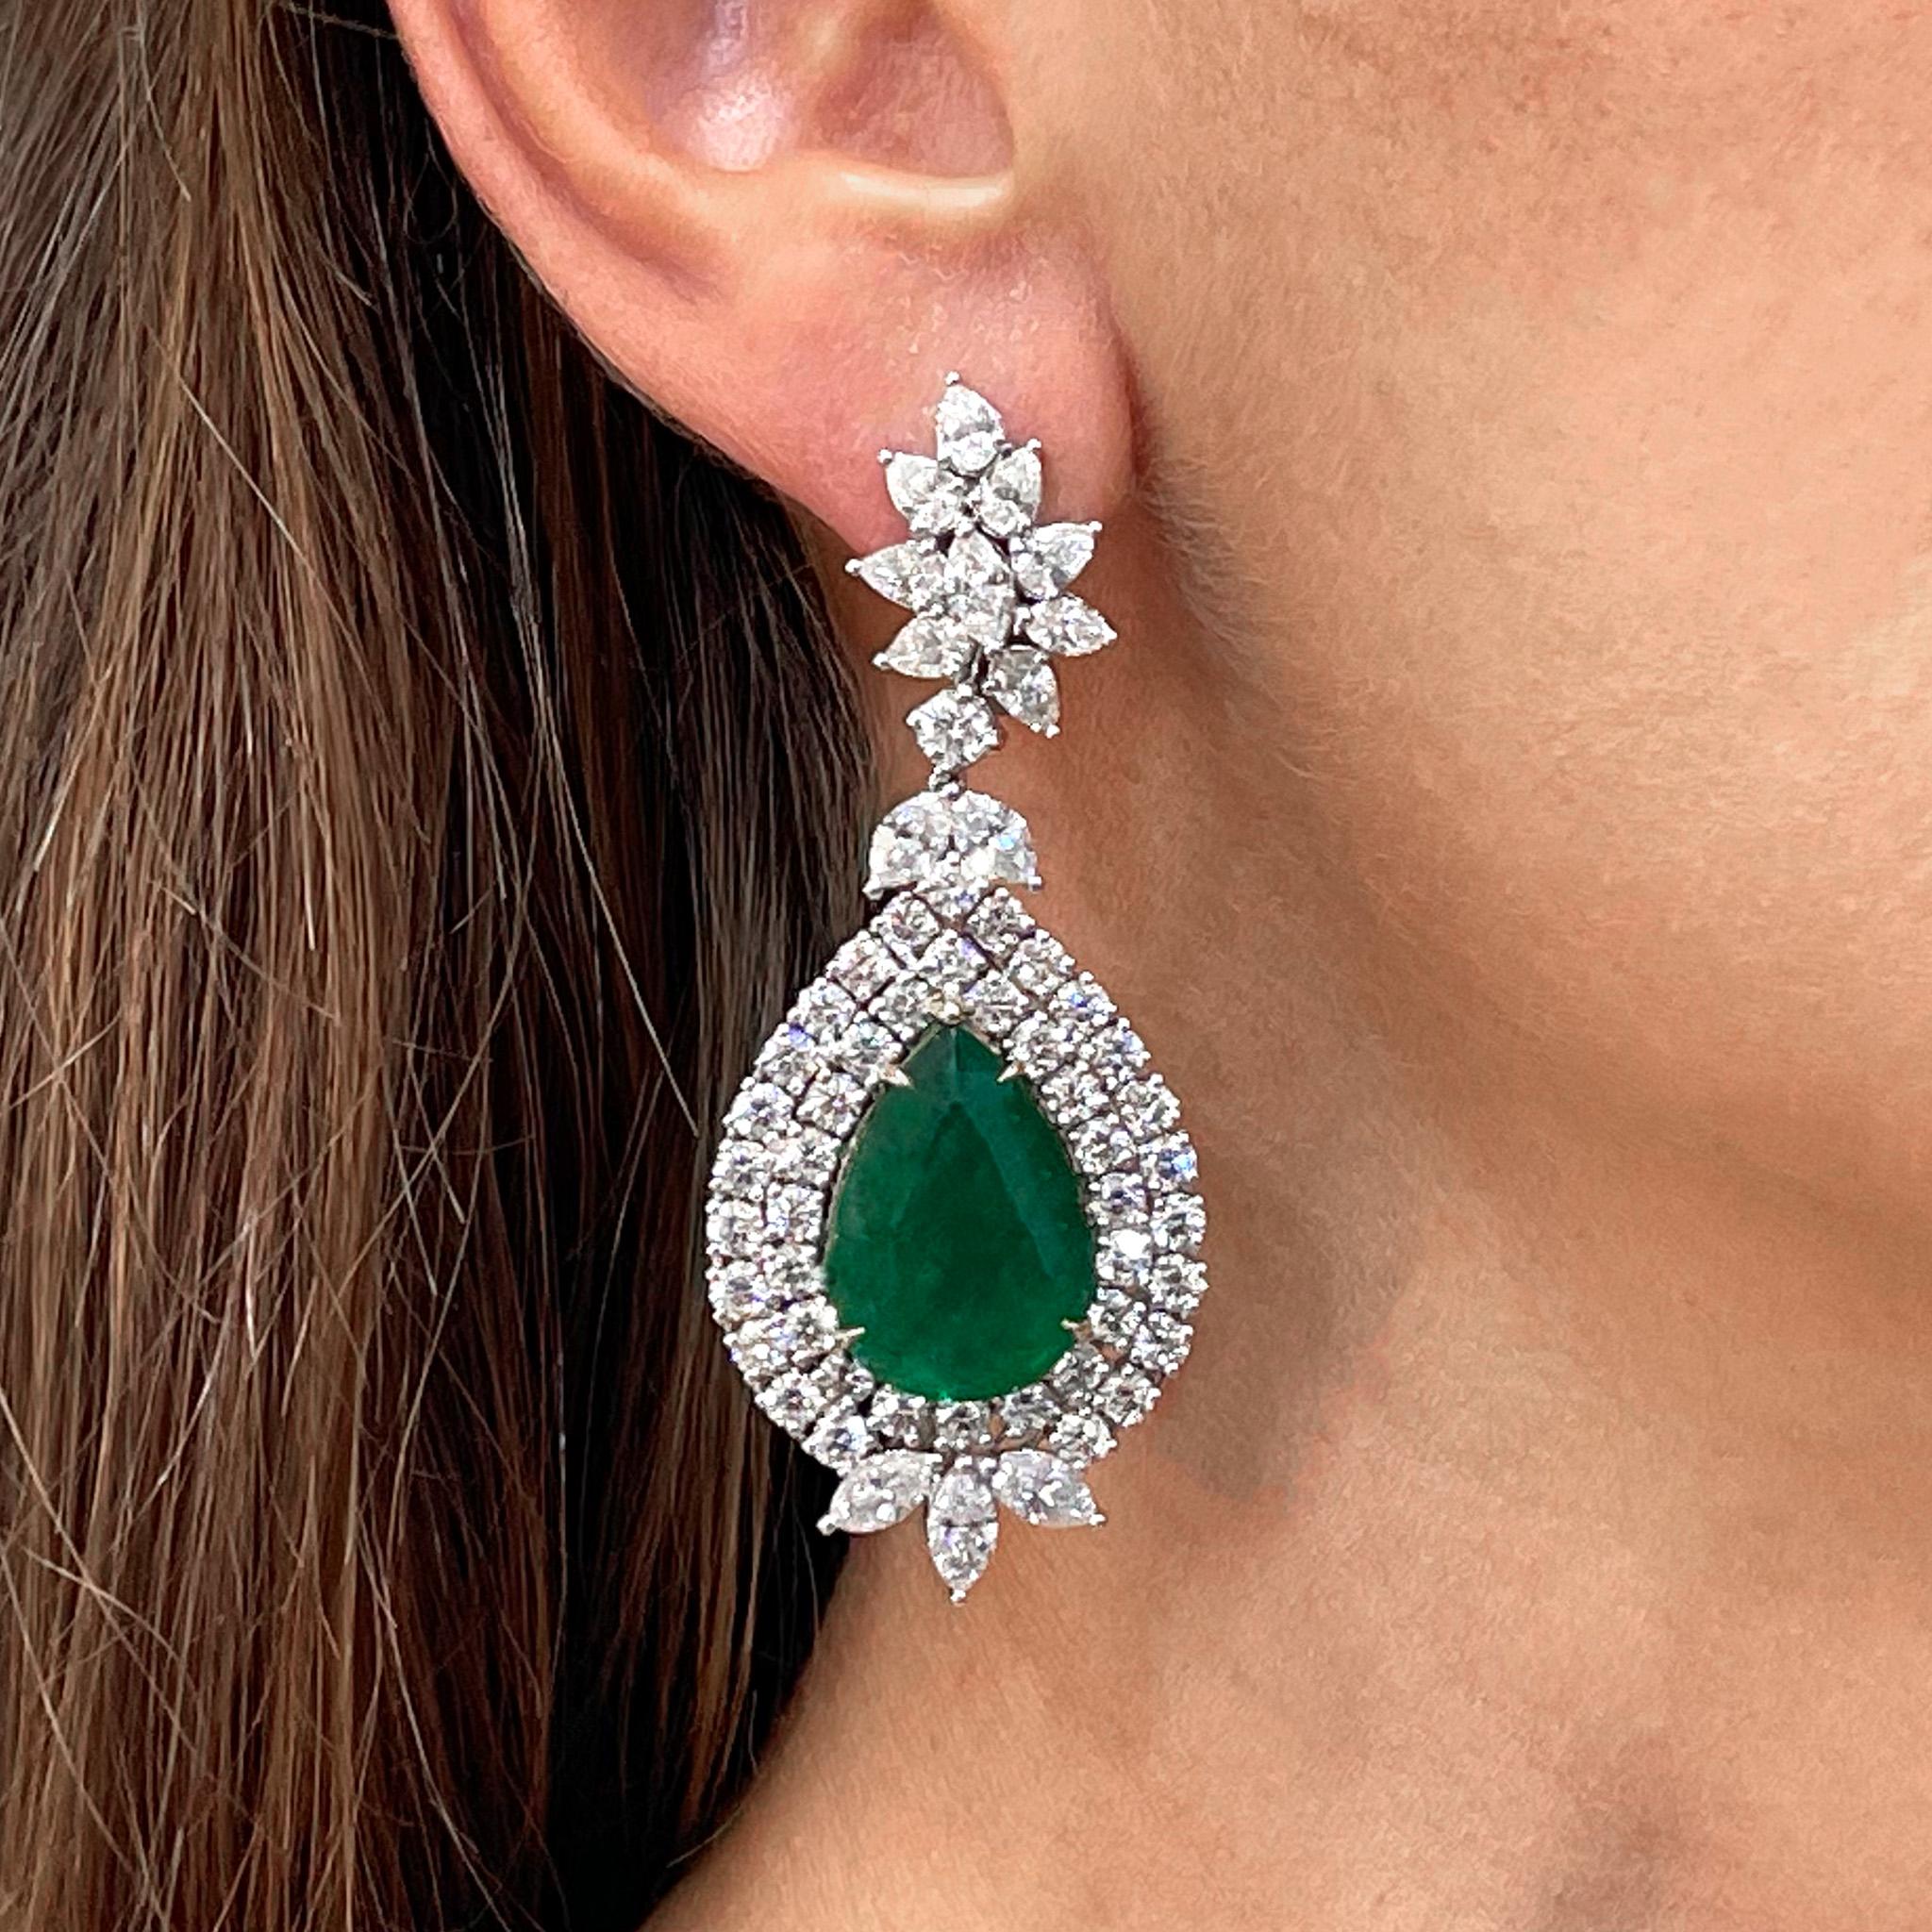 It comes with the Gemological Appraisal by GIA GG/AJP
All Gemstones are Natural
Emeralds = 21.86 Carats
Diamonds = 10.52 Carats
( Color: F-G, Clarity: VVS-VS )